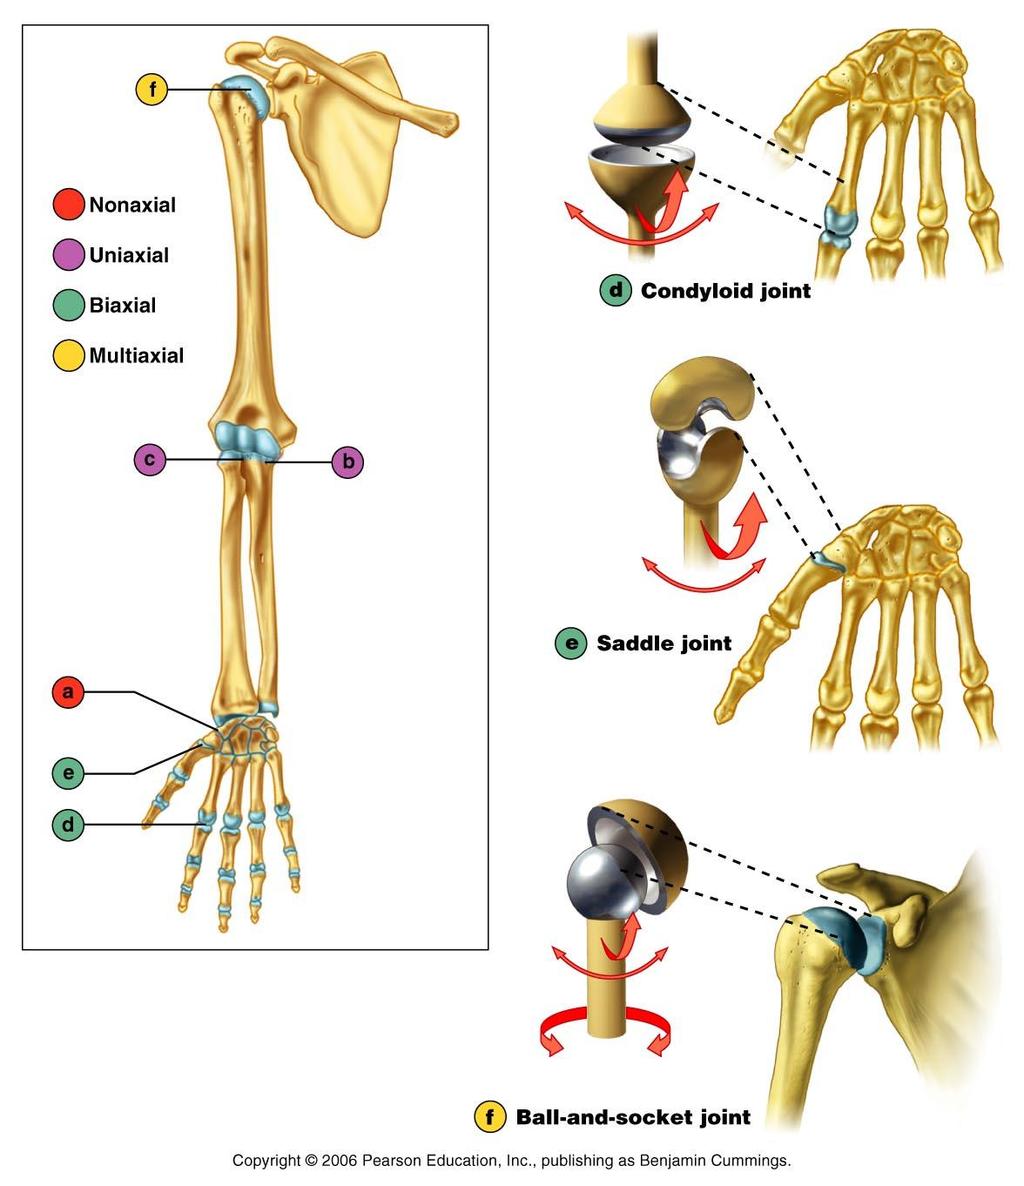 -- condyloid = allows all movements except rotation (e.g. between metacarpals amid proximal phalanges).